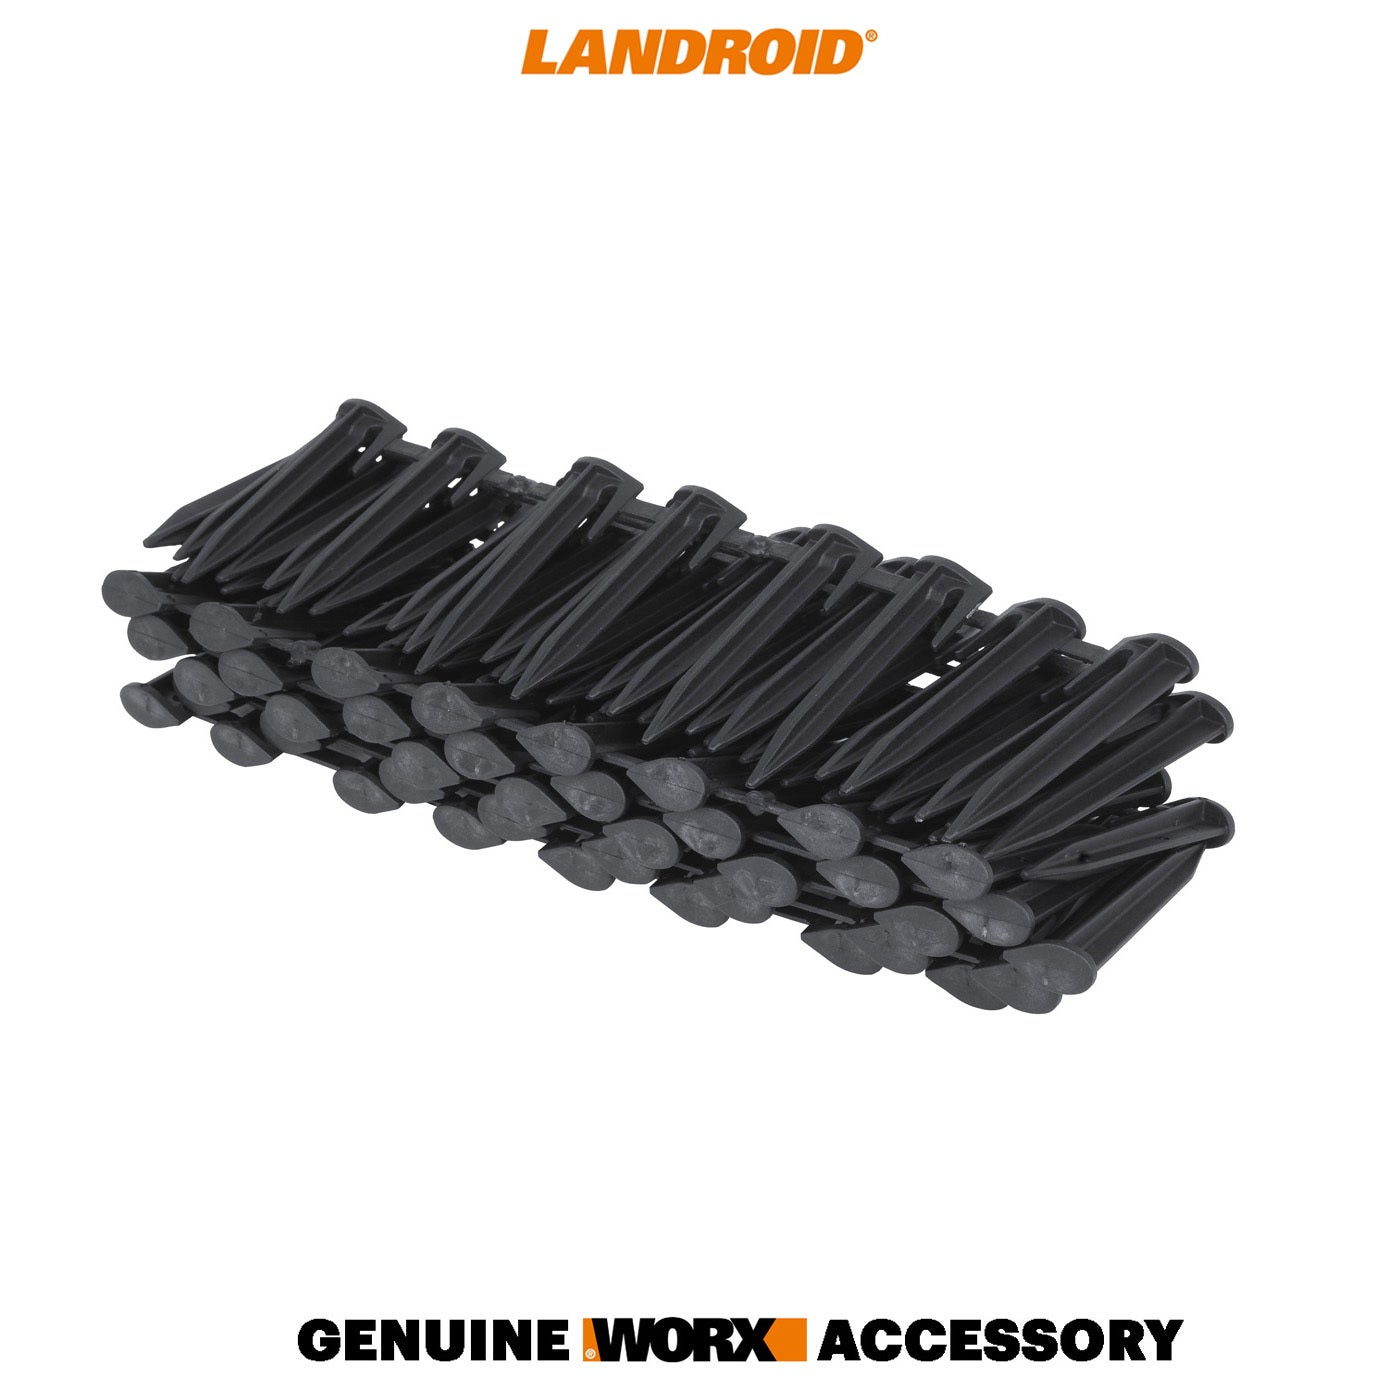 WORX LANDROID 200pc, 83mm Lawn Pegs Stakes for Boundary Wire Installation for Robotic Lawn Mower - 50024938